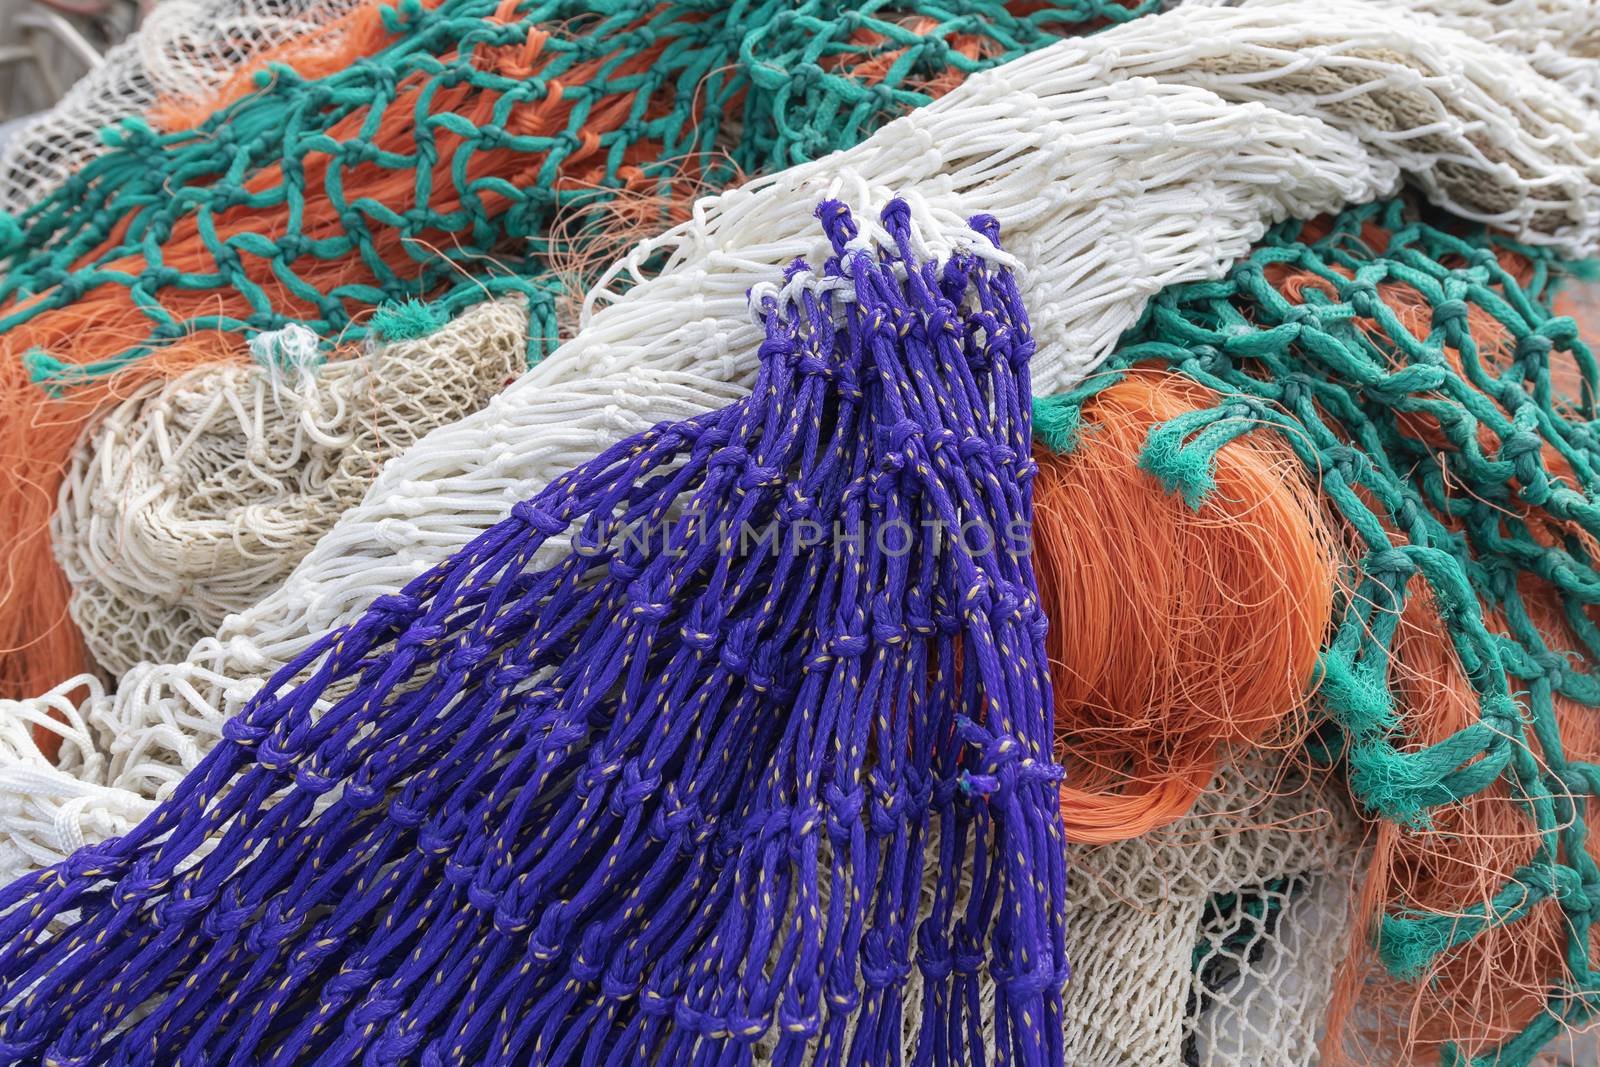 Colored stacked fishing nets in port 
 by Tofotografie